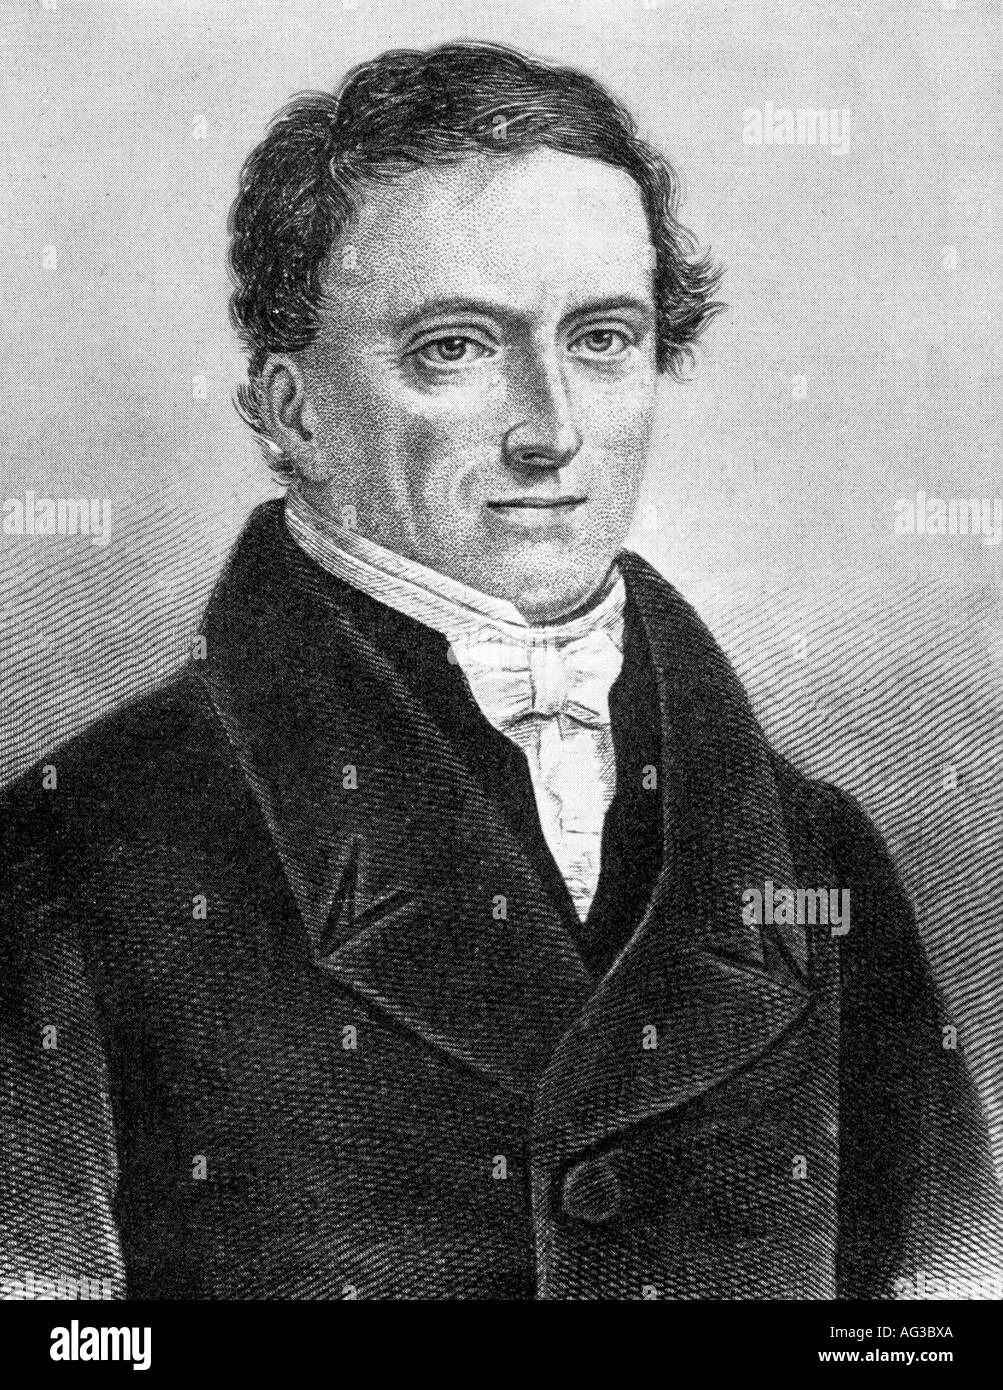 Herbart, Johann Friedrich, 4.5.1776 - 14.8.1841, German philosopher, psychologist and educationalist, portrait, engraving by Konrad Geyer, 19th century, Artist's Copyright has not to be cleared Stock Photo